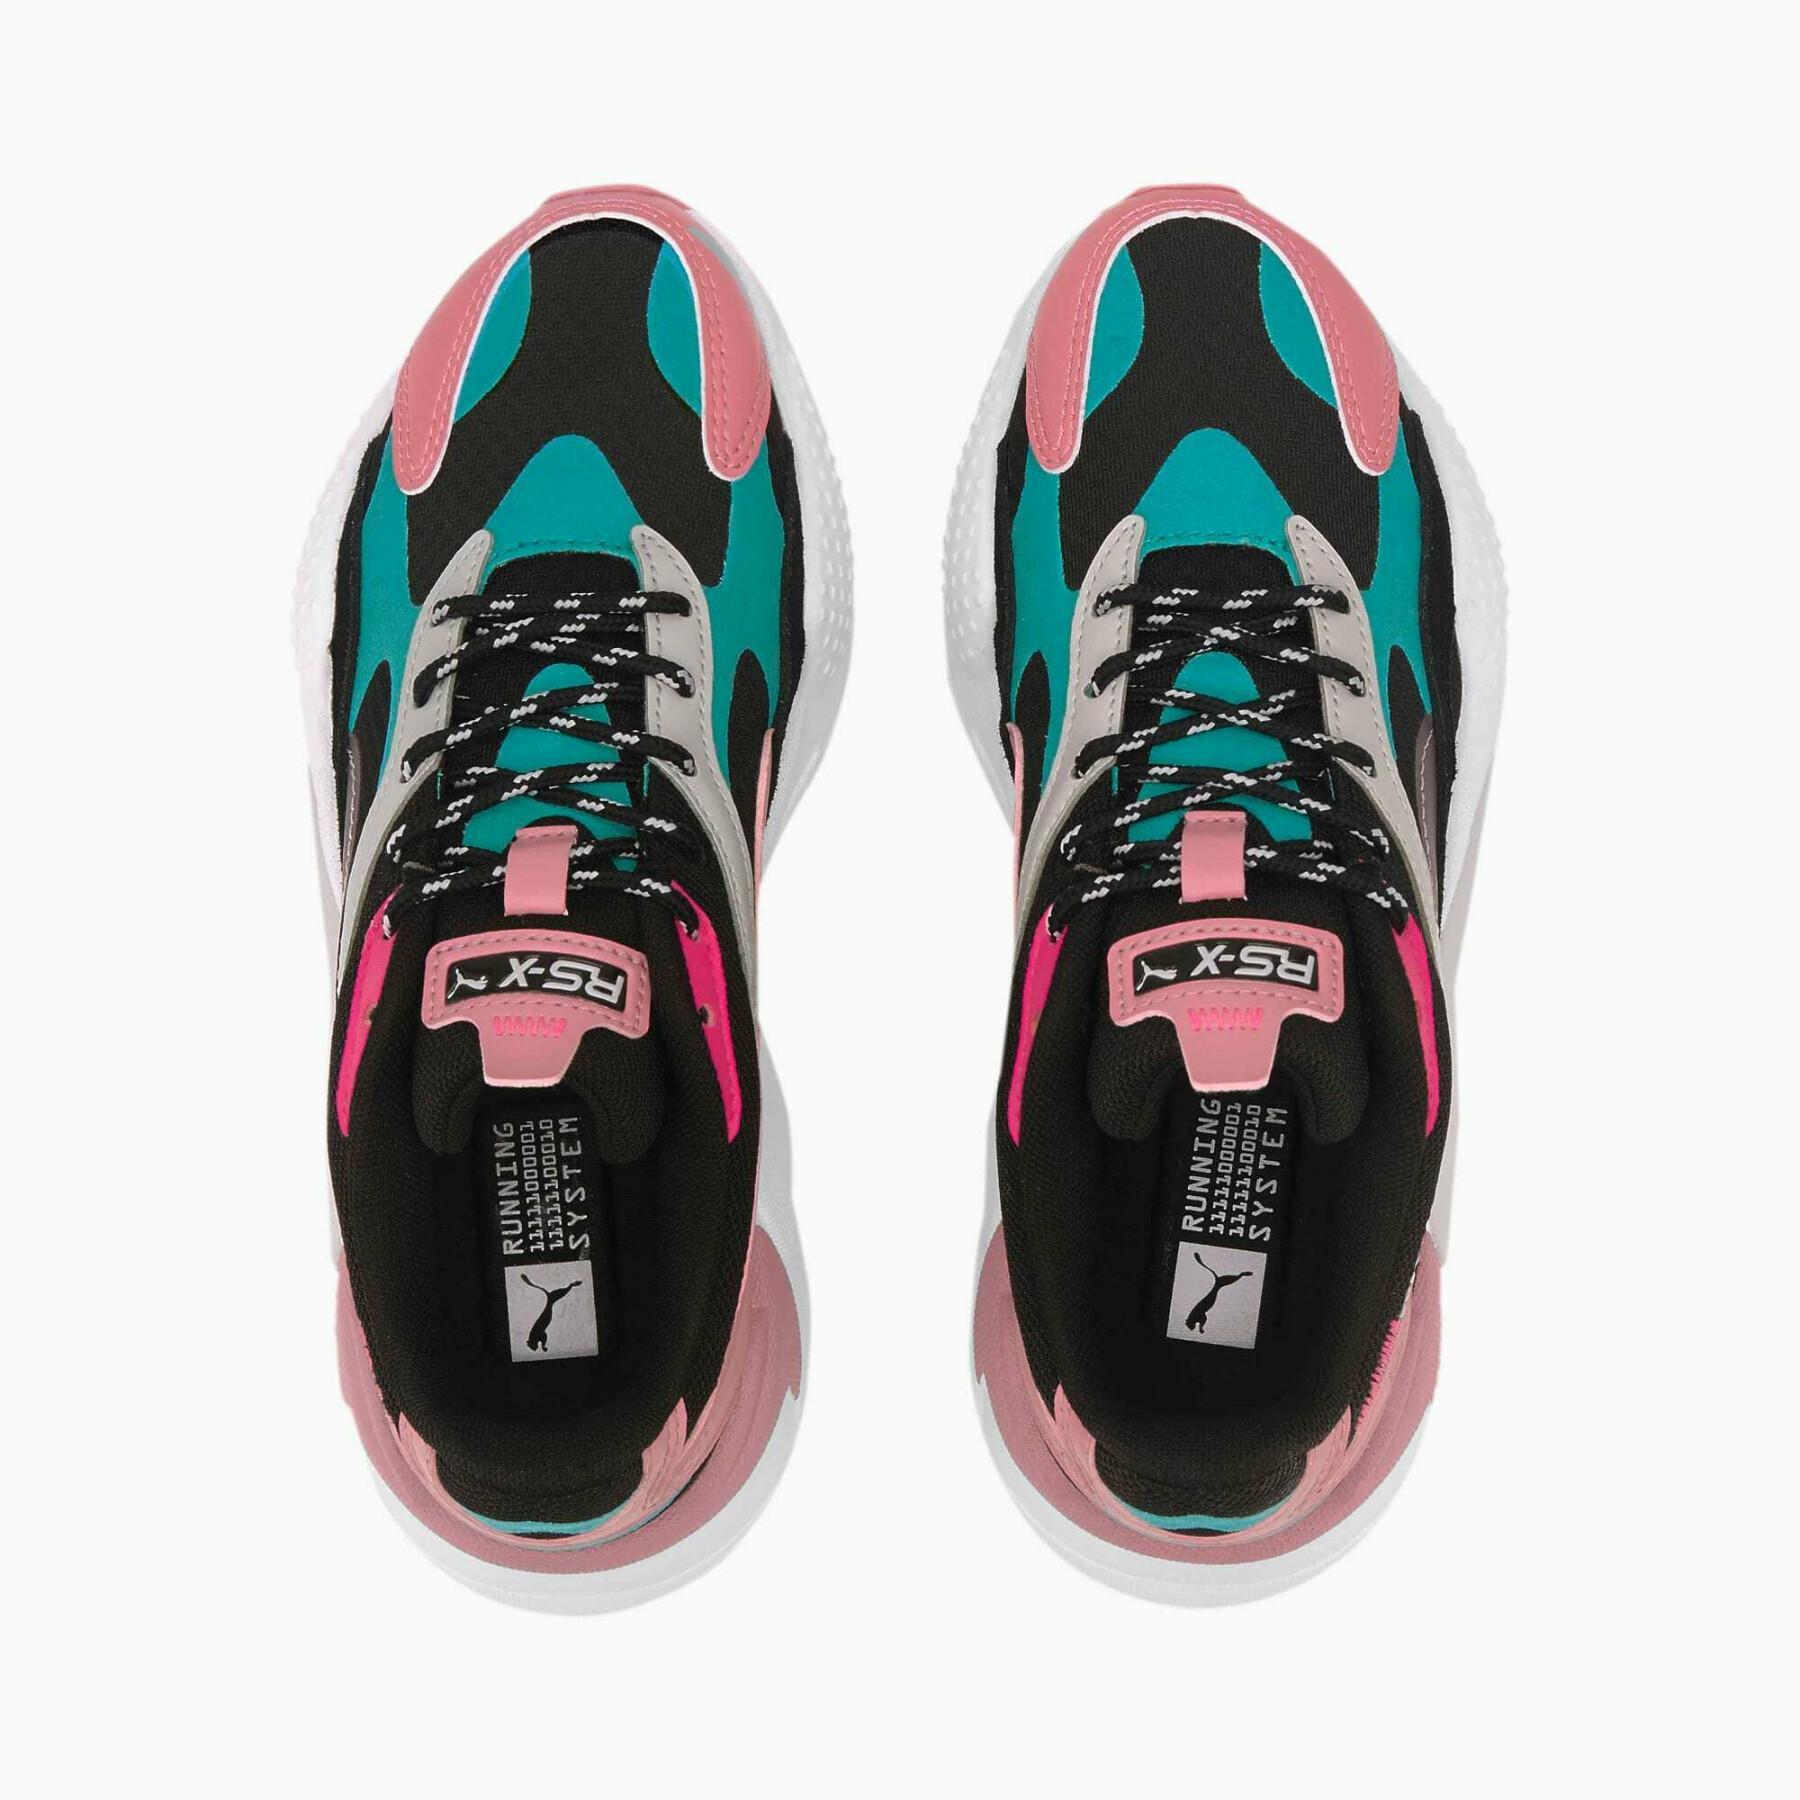 Chaussures enfant Puma RS-X³ City Attack